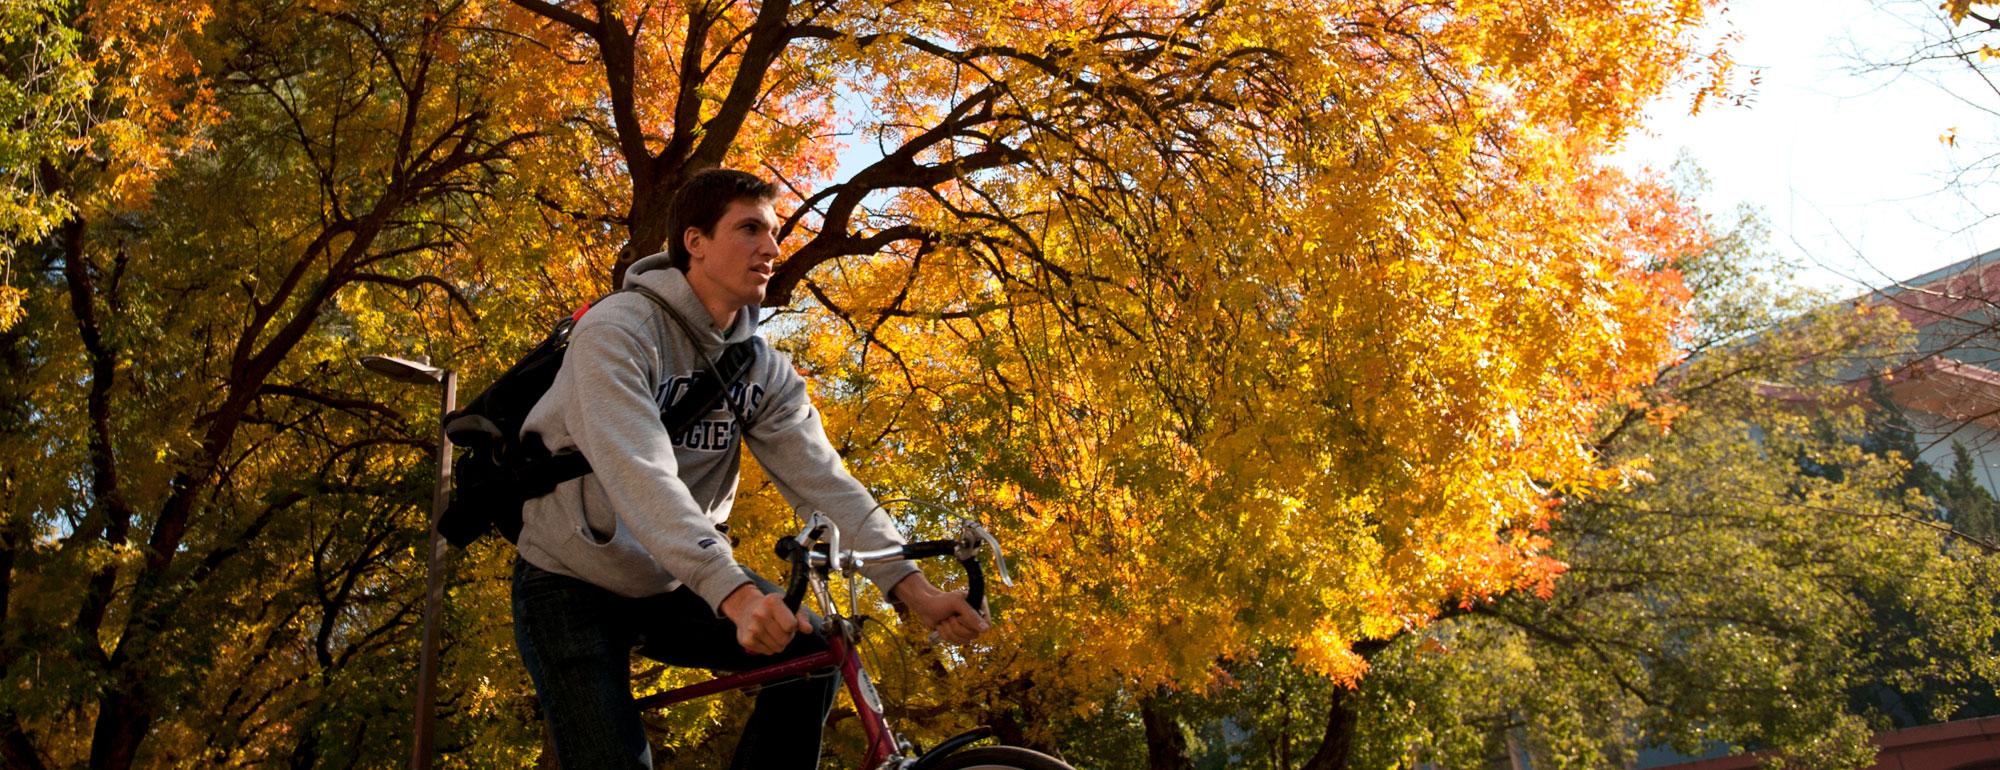 A male student rides his bicycle under the Fall foliage on the ϲʿͼ campus